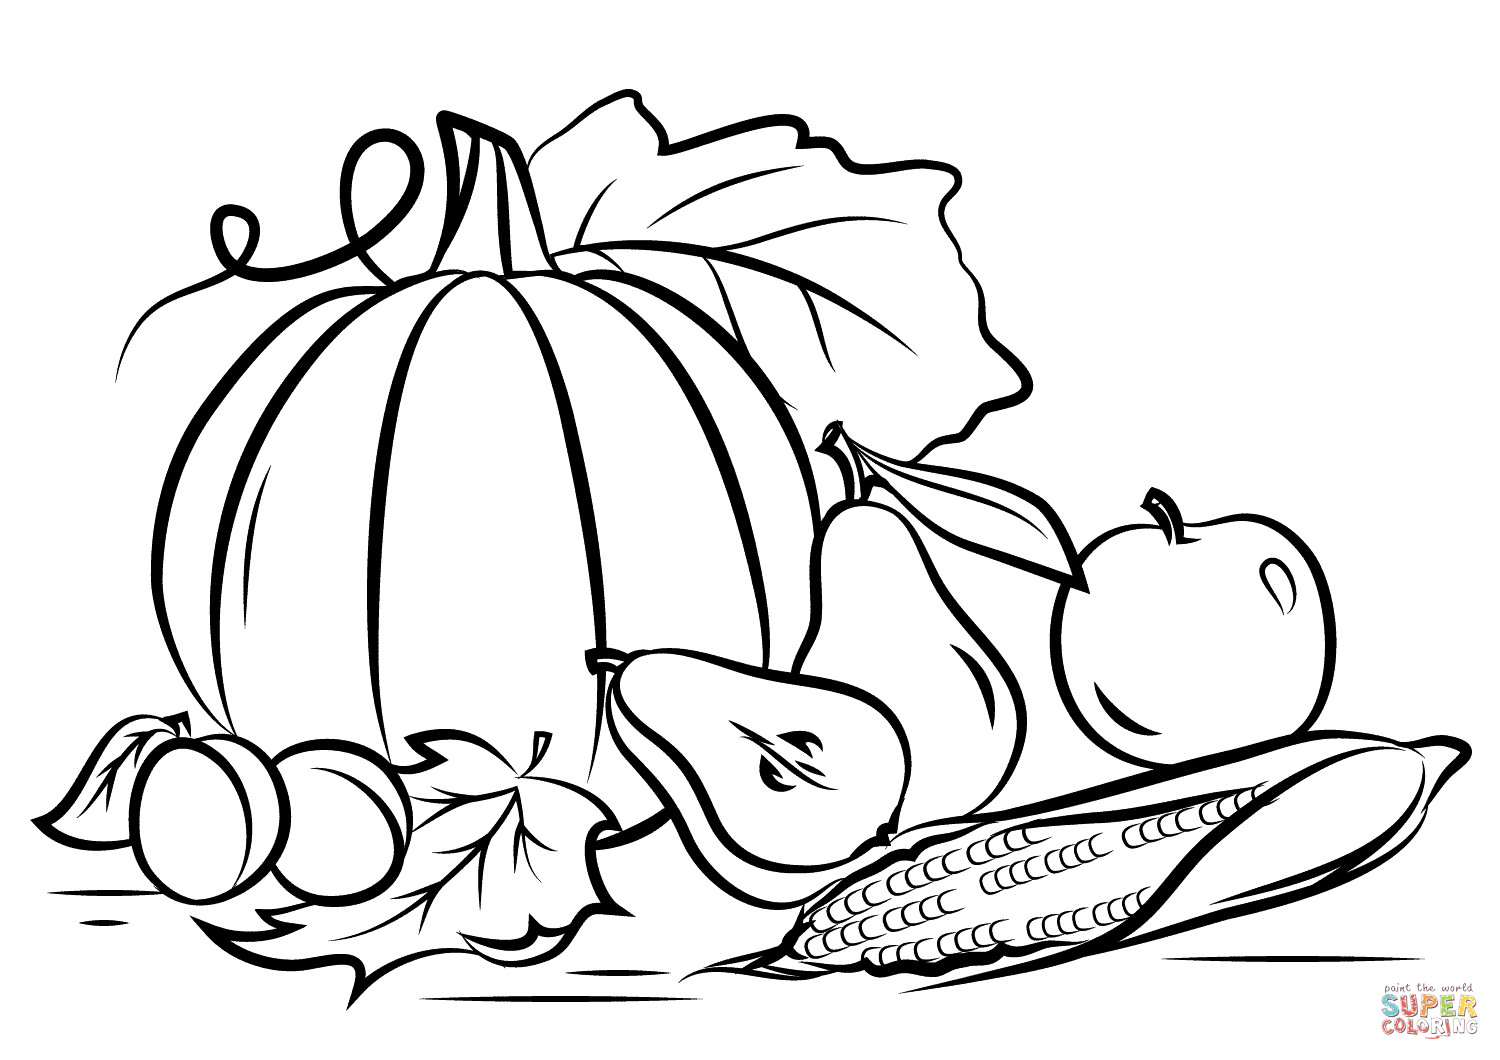 Free Printable Autumn Coloring Pages
 Autumn Harvest coloring page